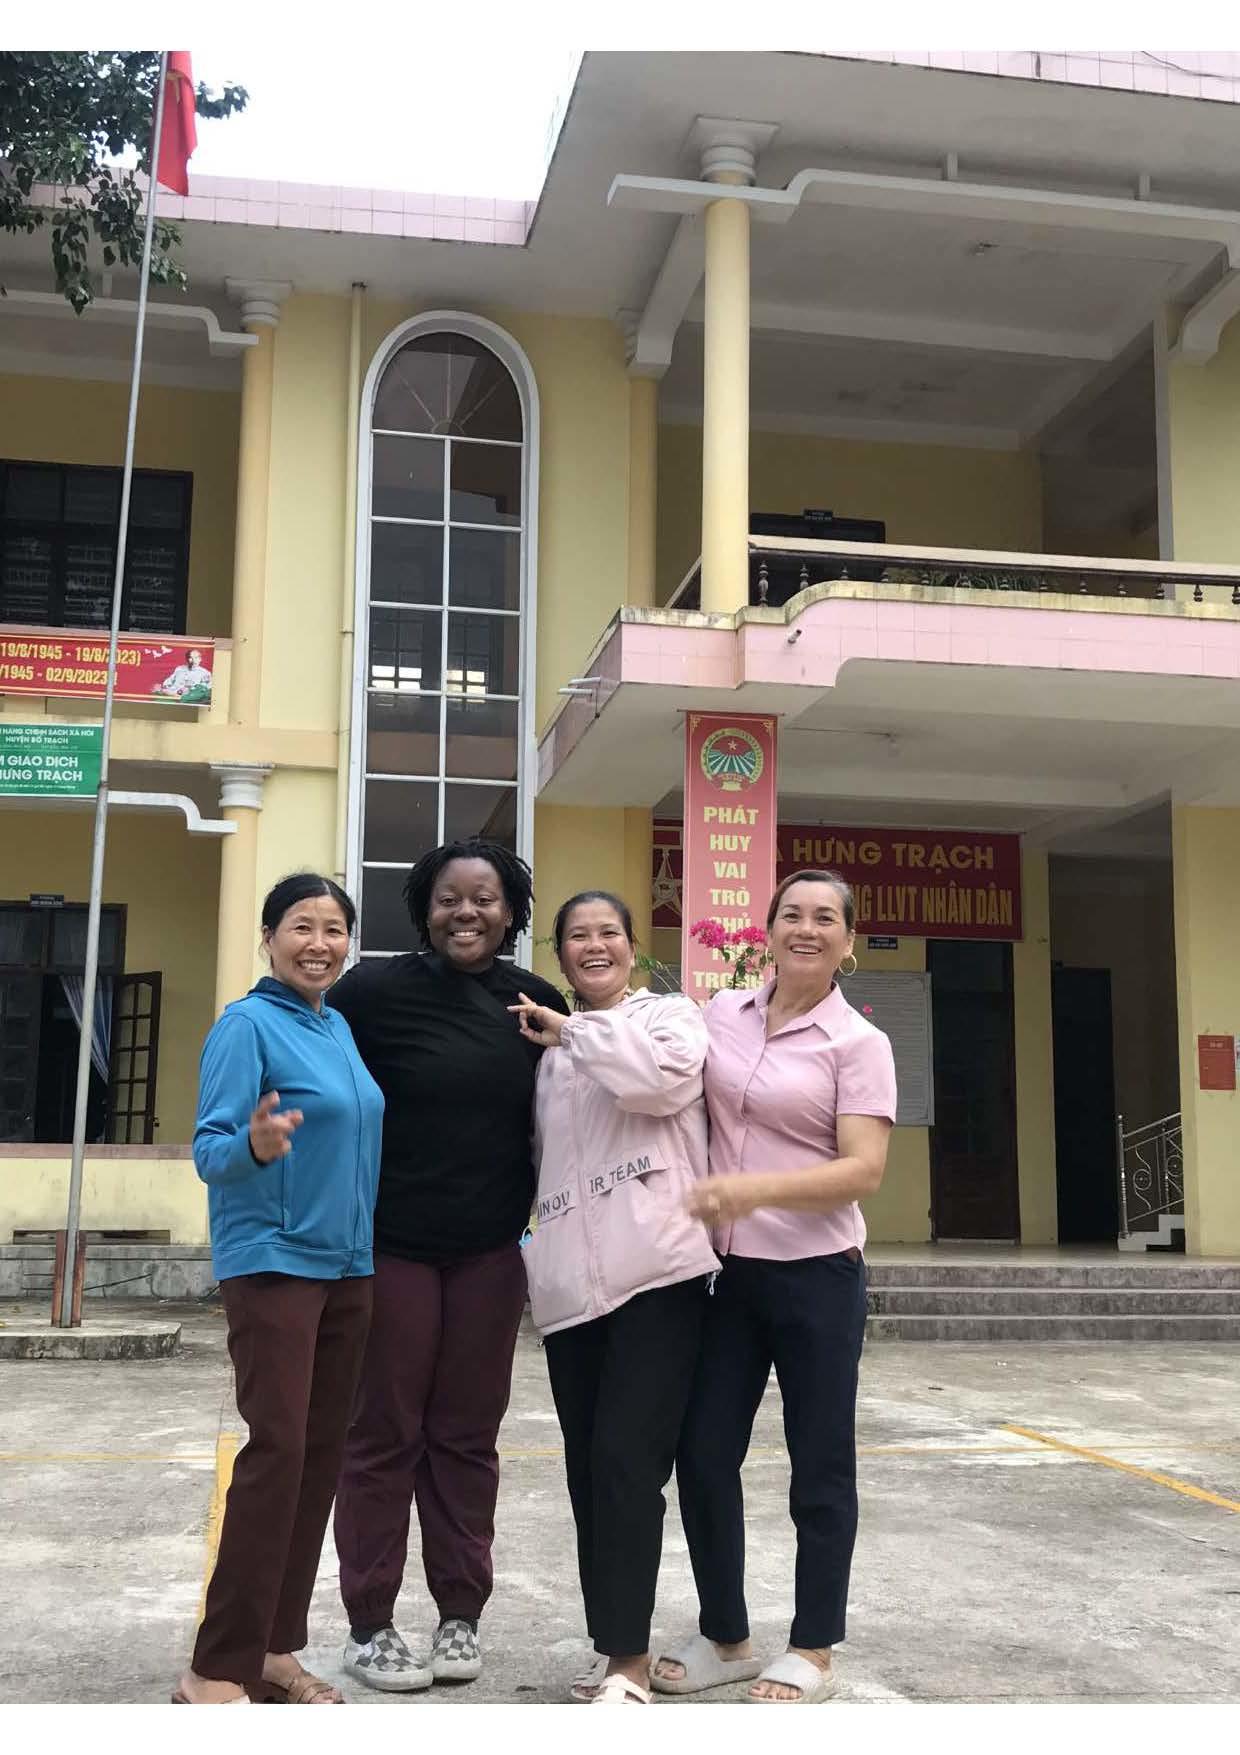 Group of 4 people in front of a vietnamese building